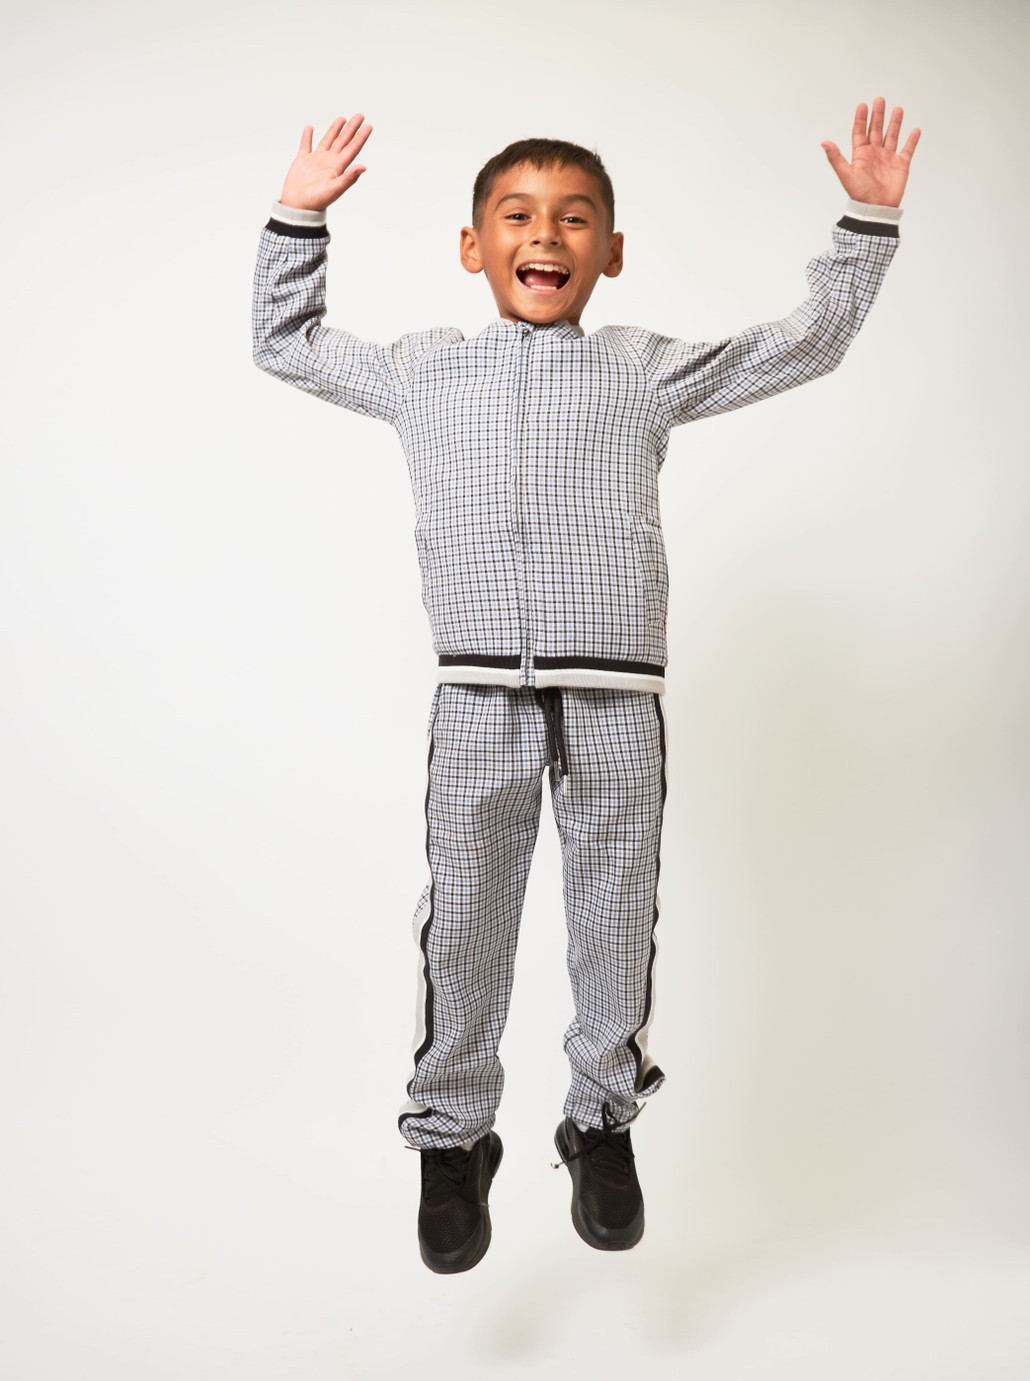 Boy wearing rack suit jumping with arms raised